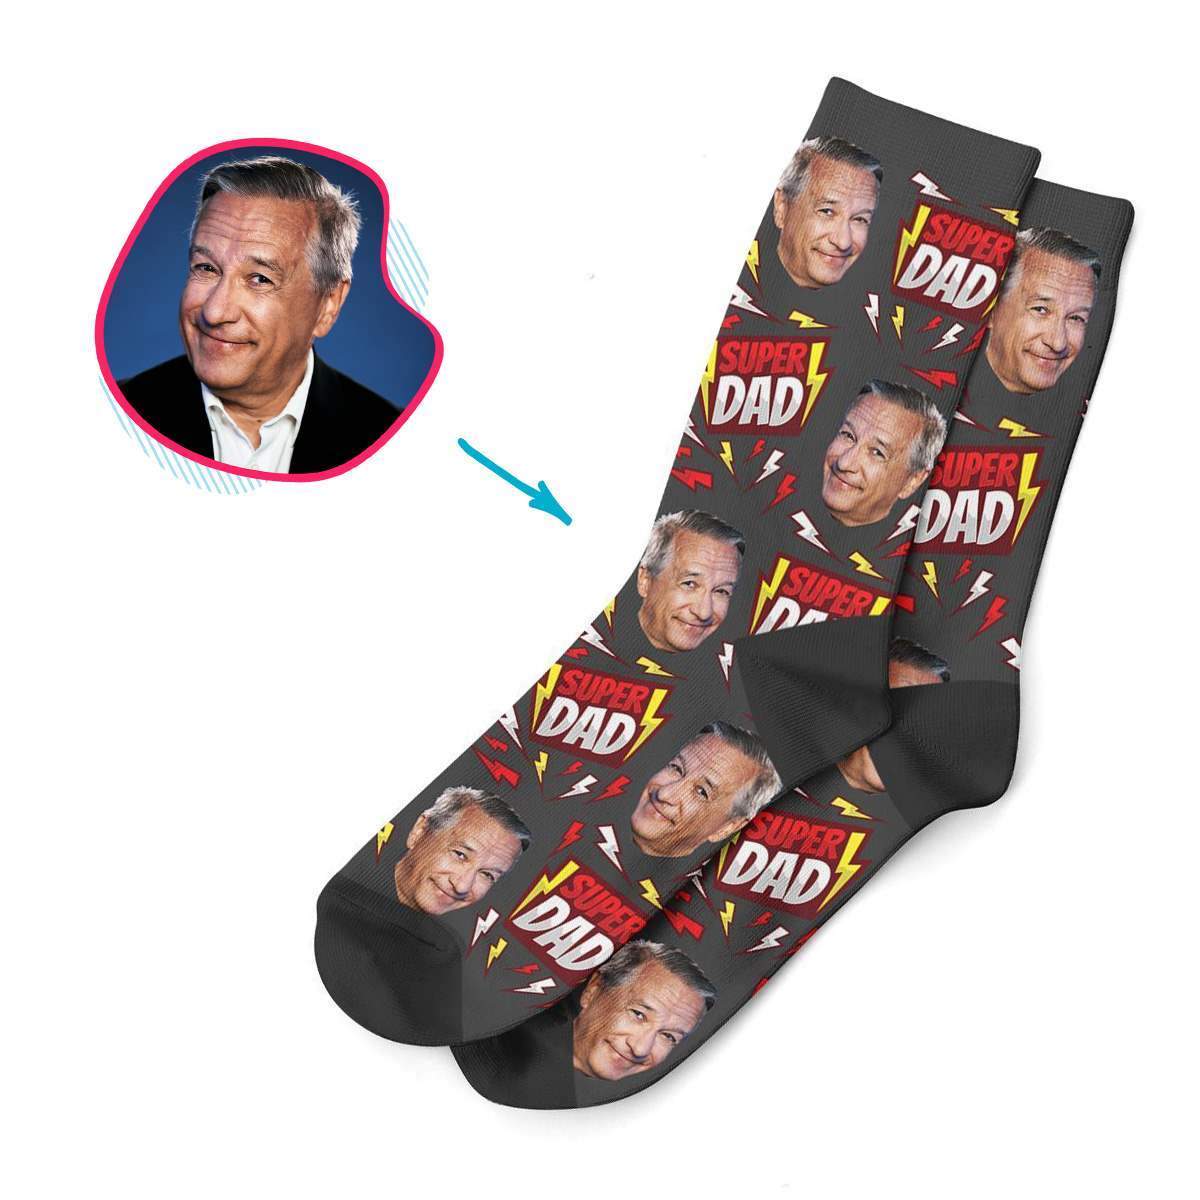 dark Super Dad socks personalized with photo of face printed on them